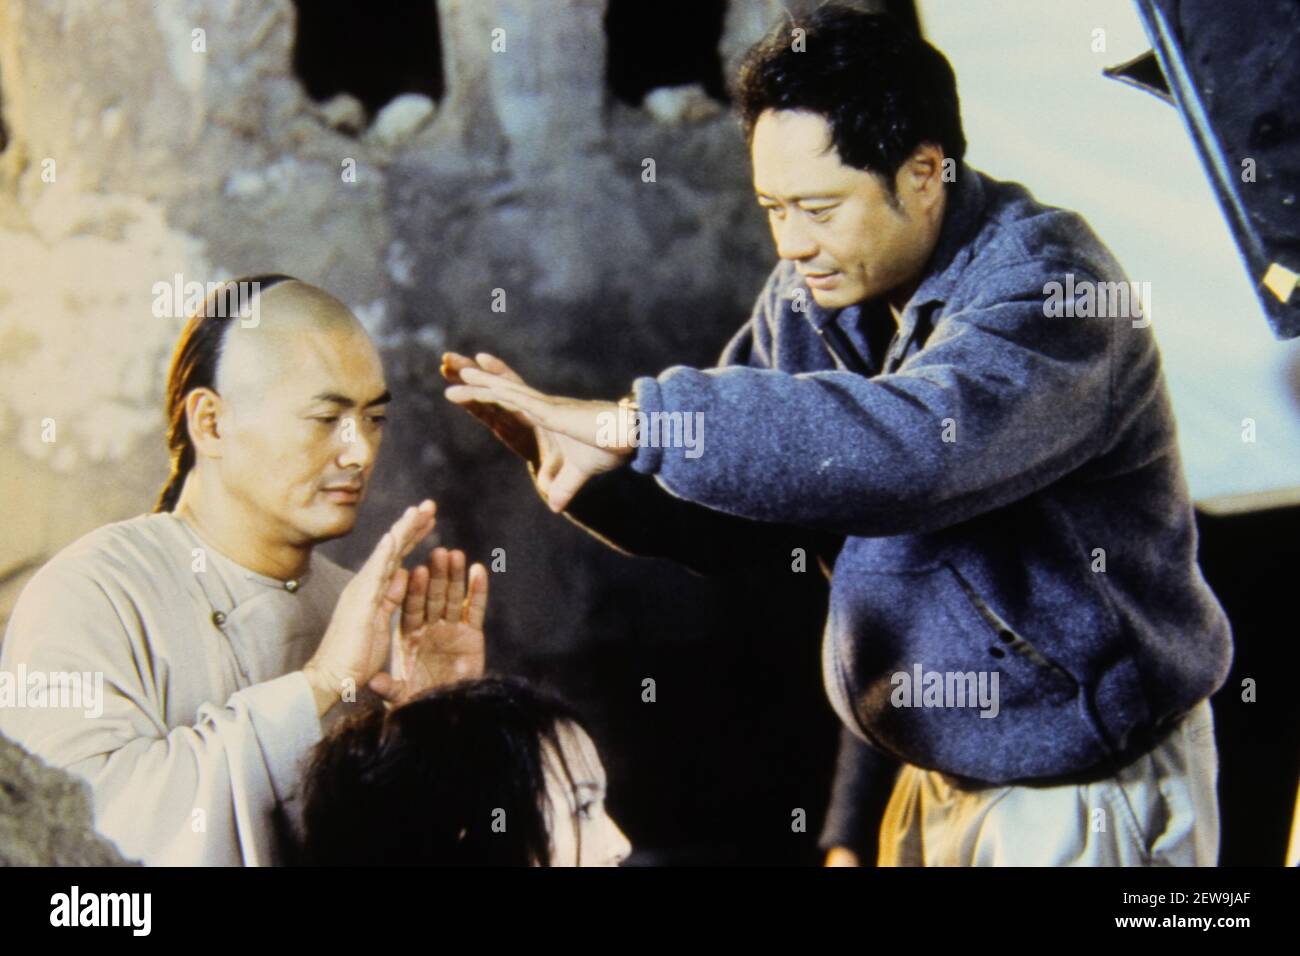 Chow Yun-fat, Director Ang Lee, 'Crouching Tiger, Hidden Dragon' (2000) Sony Pictures Classic. Photo Credit: / Sony Pictures Classic/The Hollywood Archive -  File Reference # 34082-622THA Stock Photo